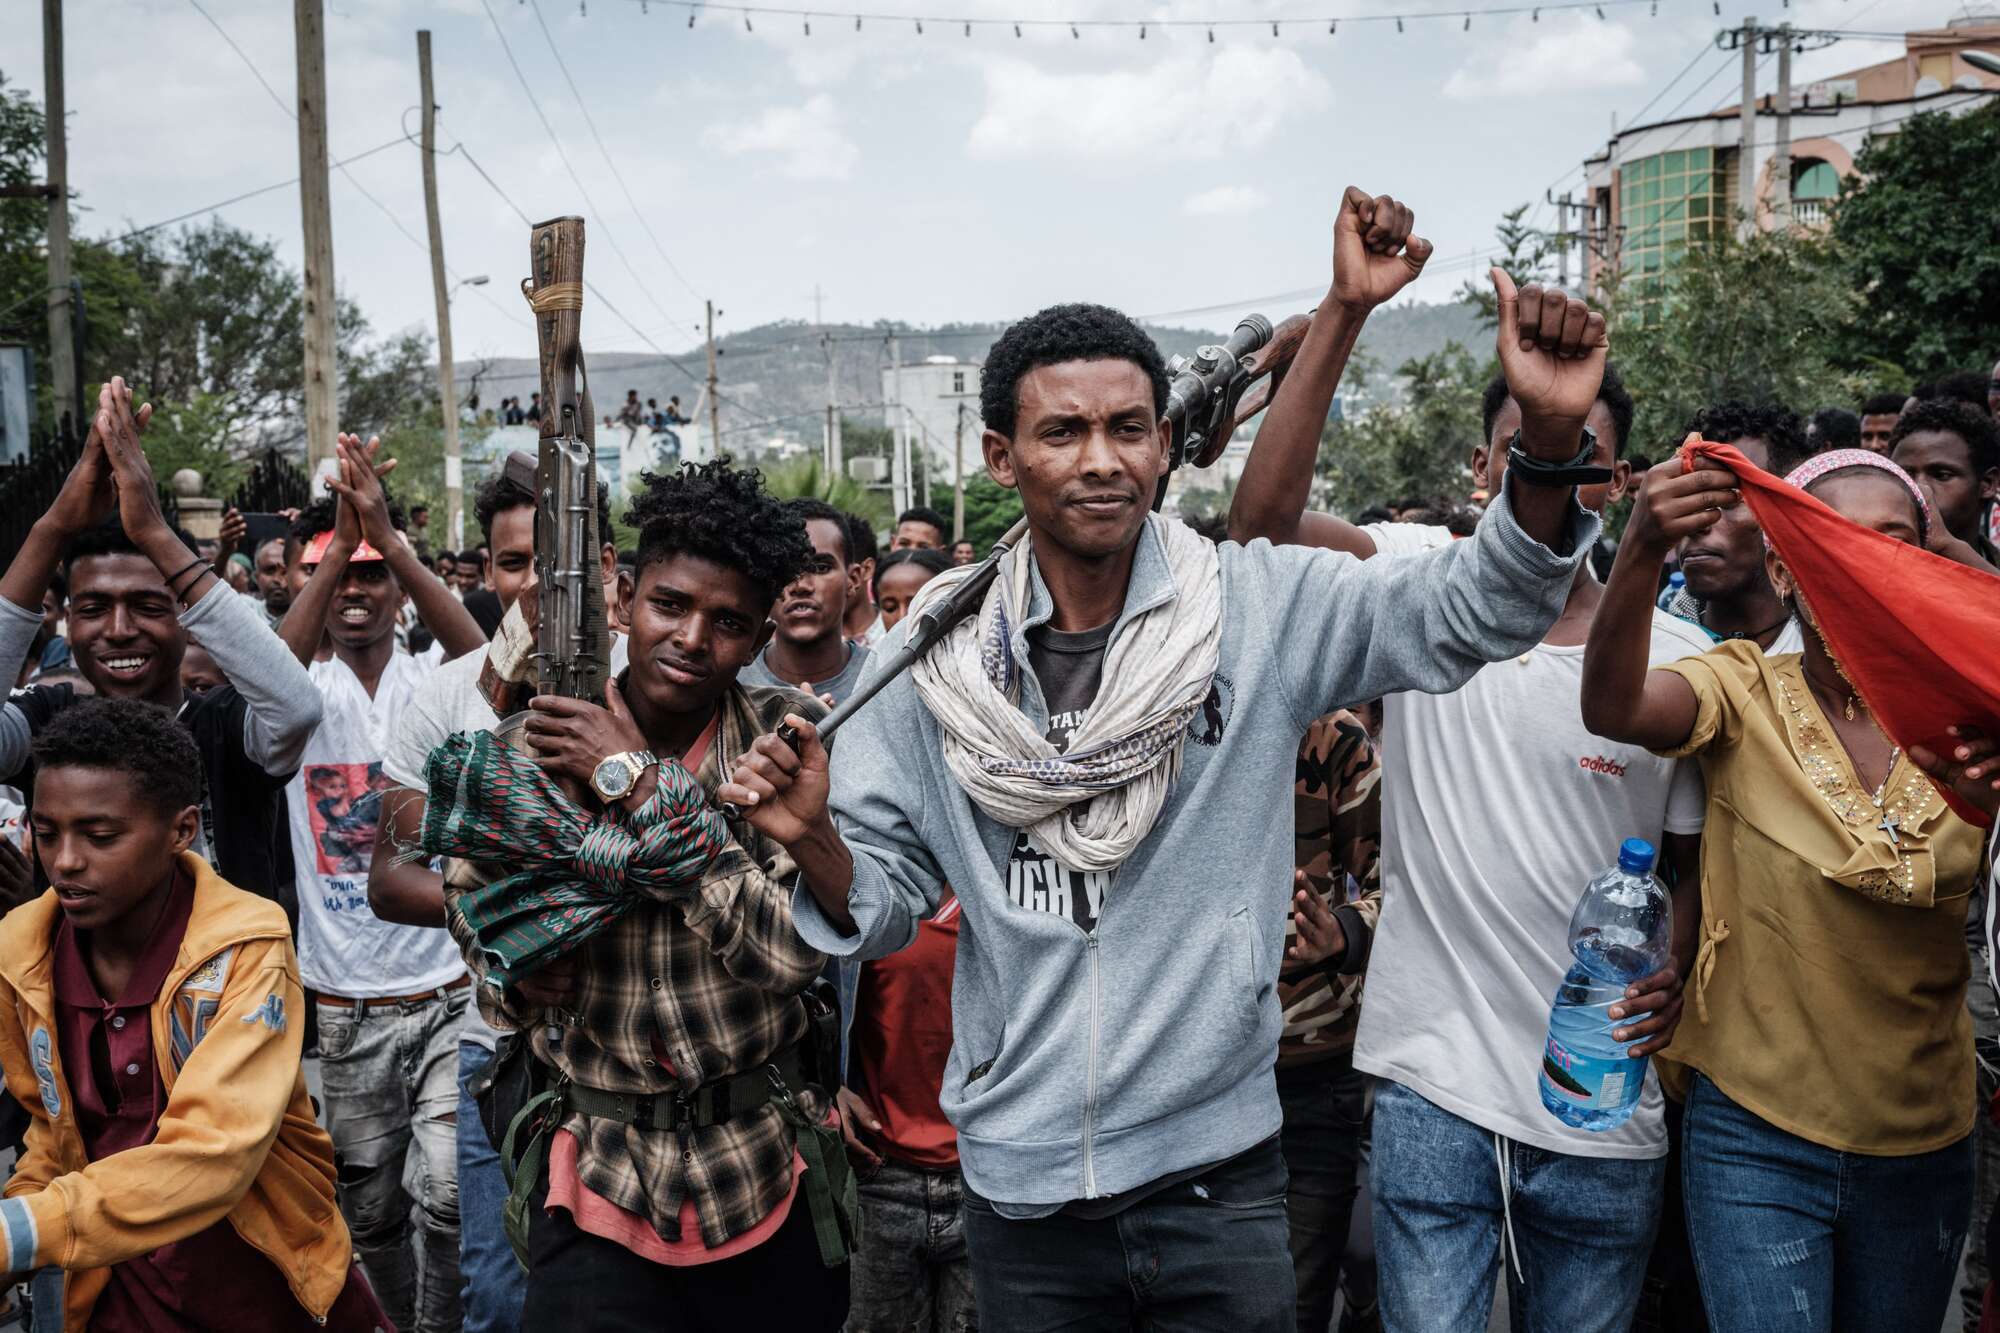 TPLF: The party at the heart of Ethiopia’s war